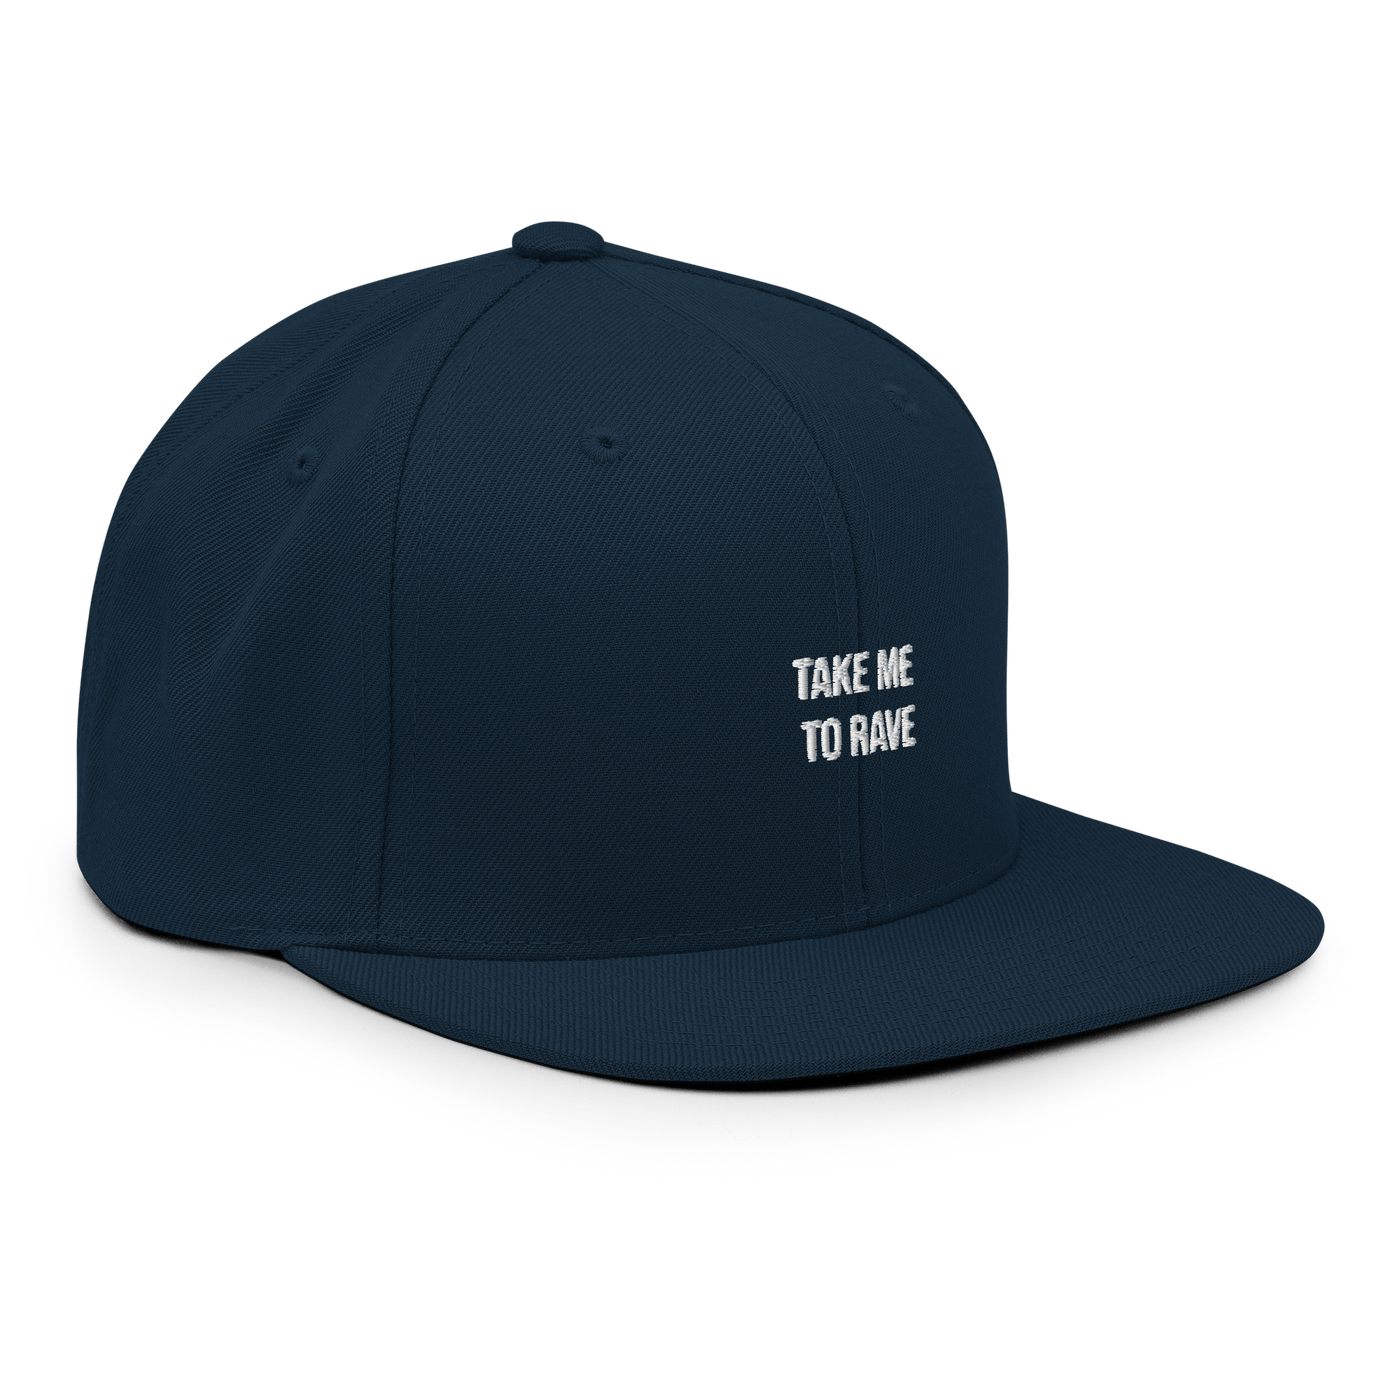 Take me to rave Snapback - Dark Navy - - Just Another Cap Store